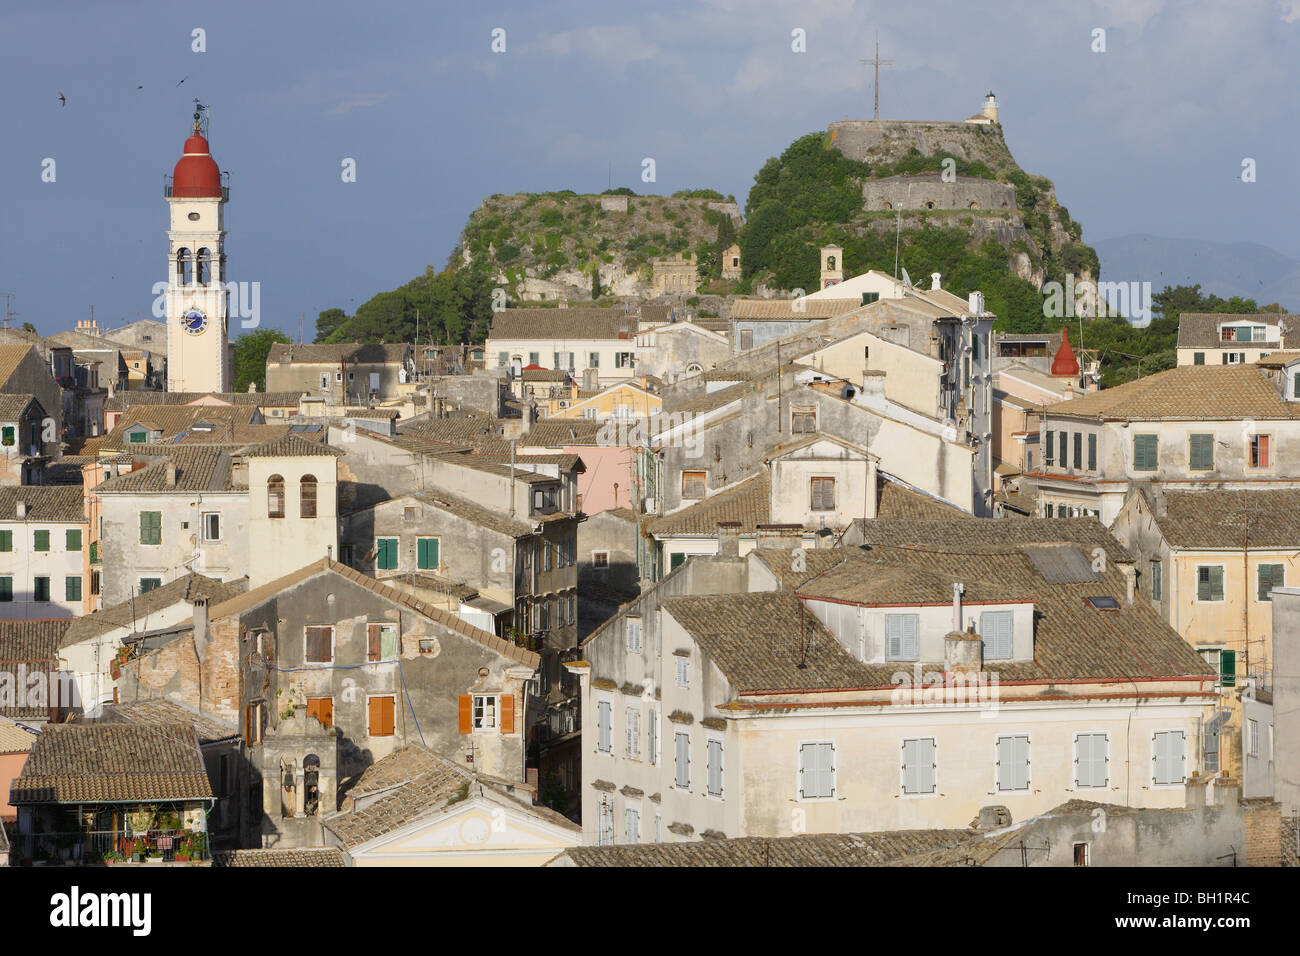 View over the roofs of the district of Ambiello at the old citadel, Corfu, Ionian Islands, Greece Stock Photo